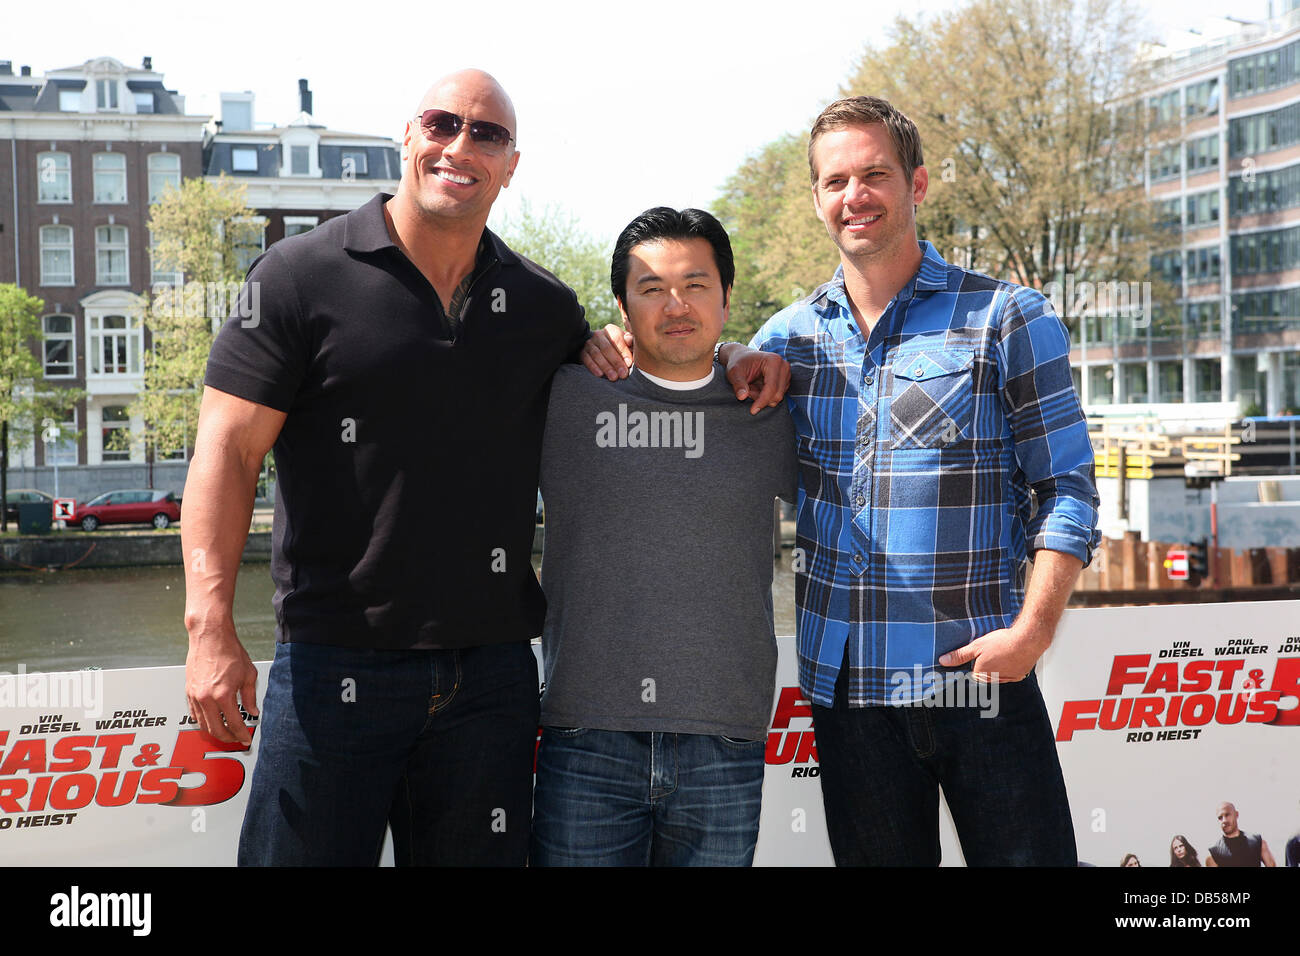 Dwayne Johnson, aka The Rock, Director, Justin Lin and Paul Walker attend a Photocall for 'Fast & Furious 5: Rio Heist' outside the Pathe Arena Amsterdam, Netherlands - 26.04.11 Stock Photo